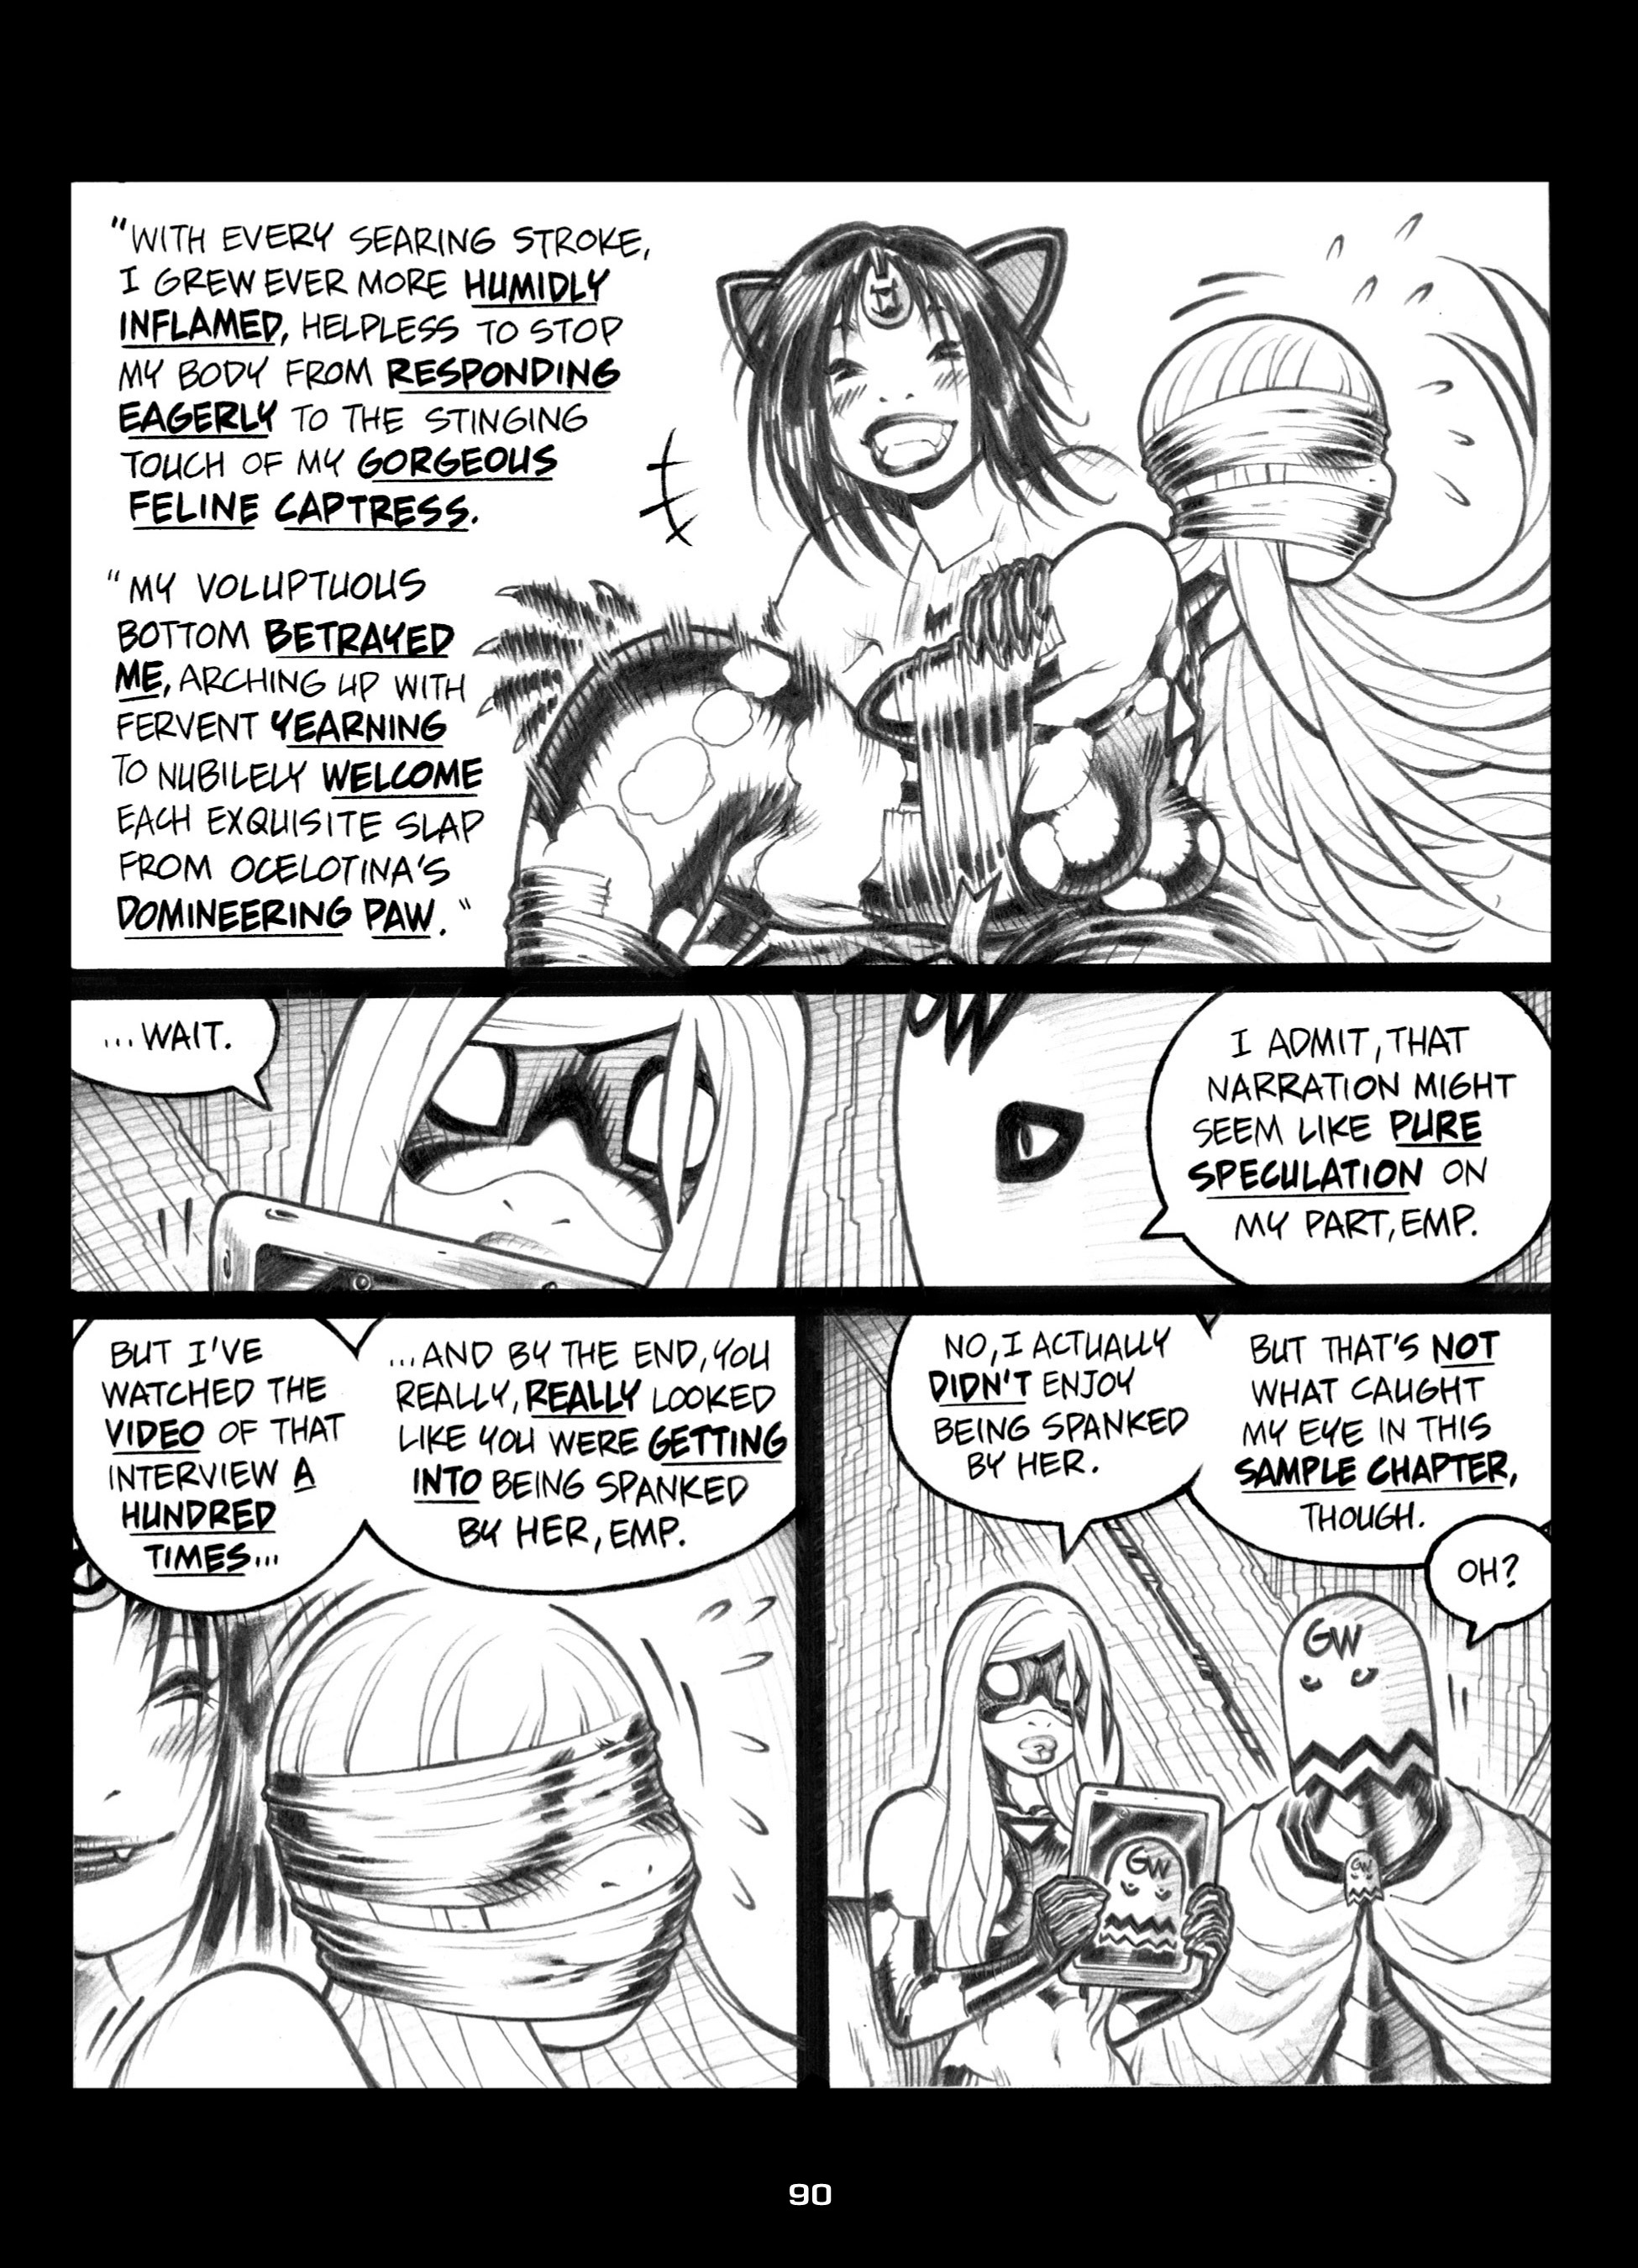 Read online Empowered comic -  Issue #9 - 90